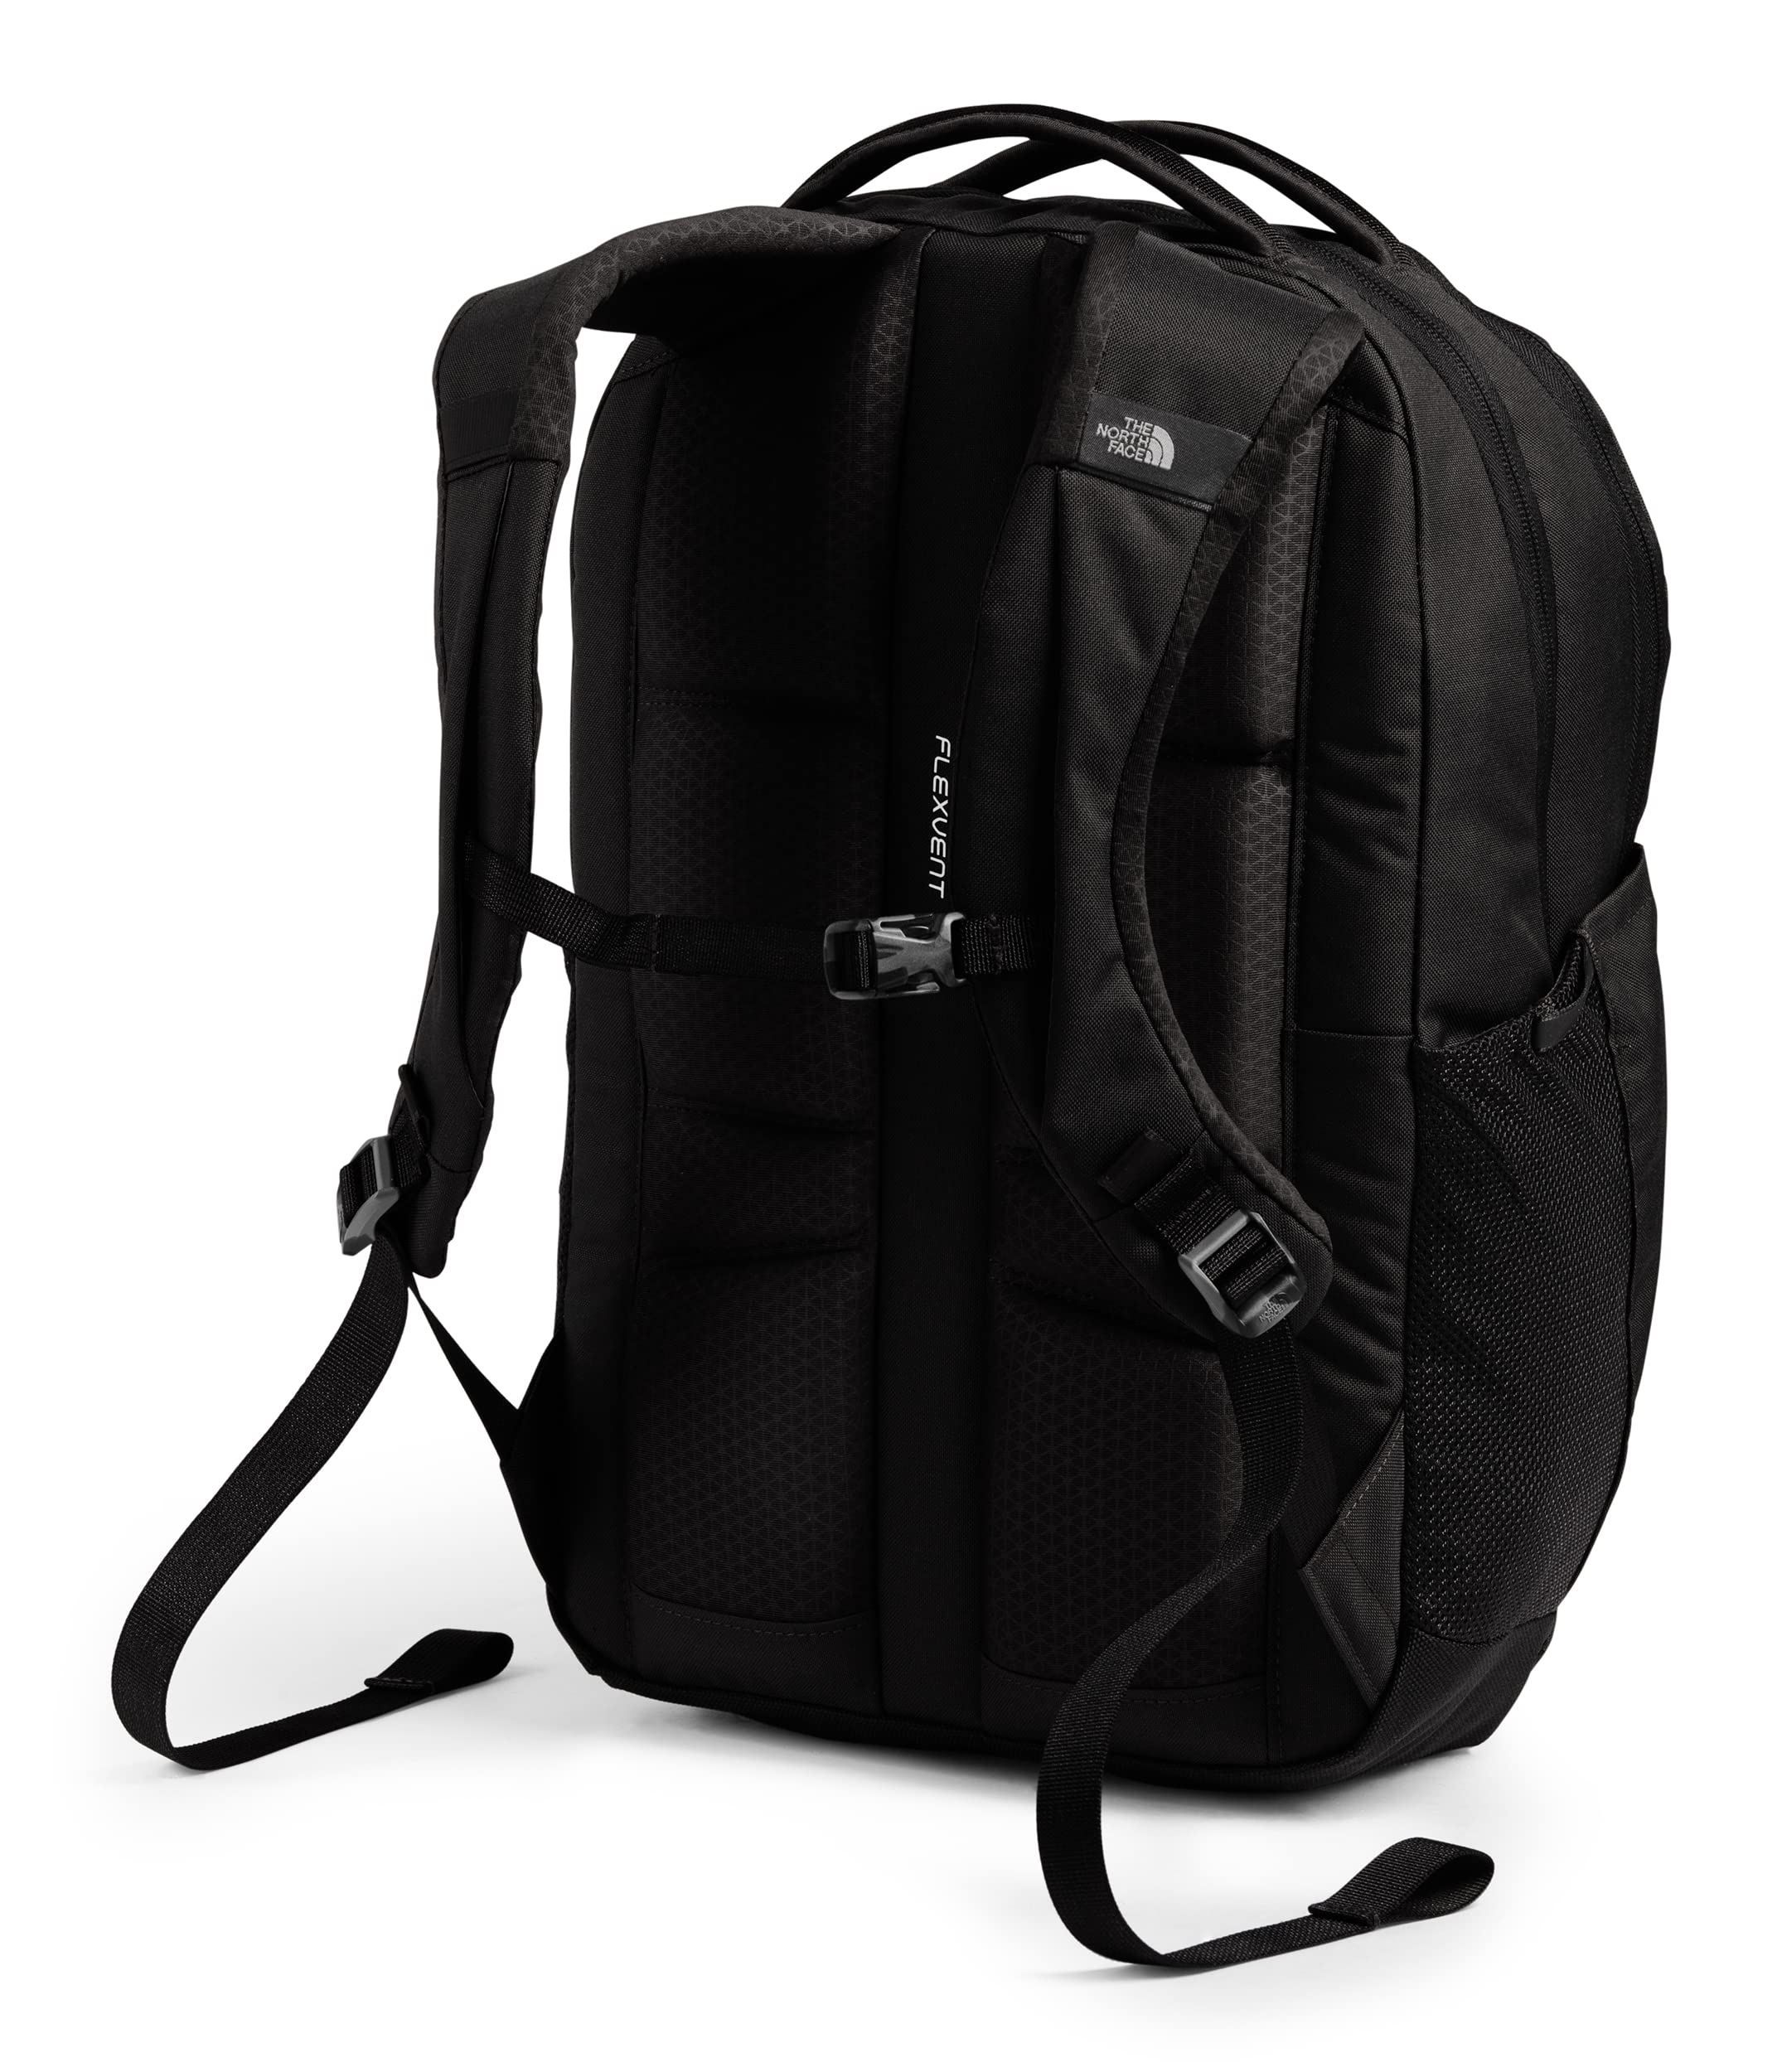 THE NORTH FACE Women's Vault Laptop Backpack, Tnf Black, One Size